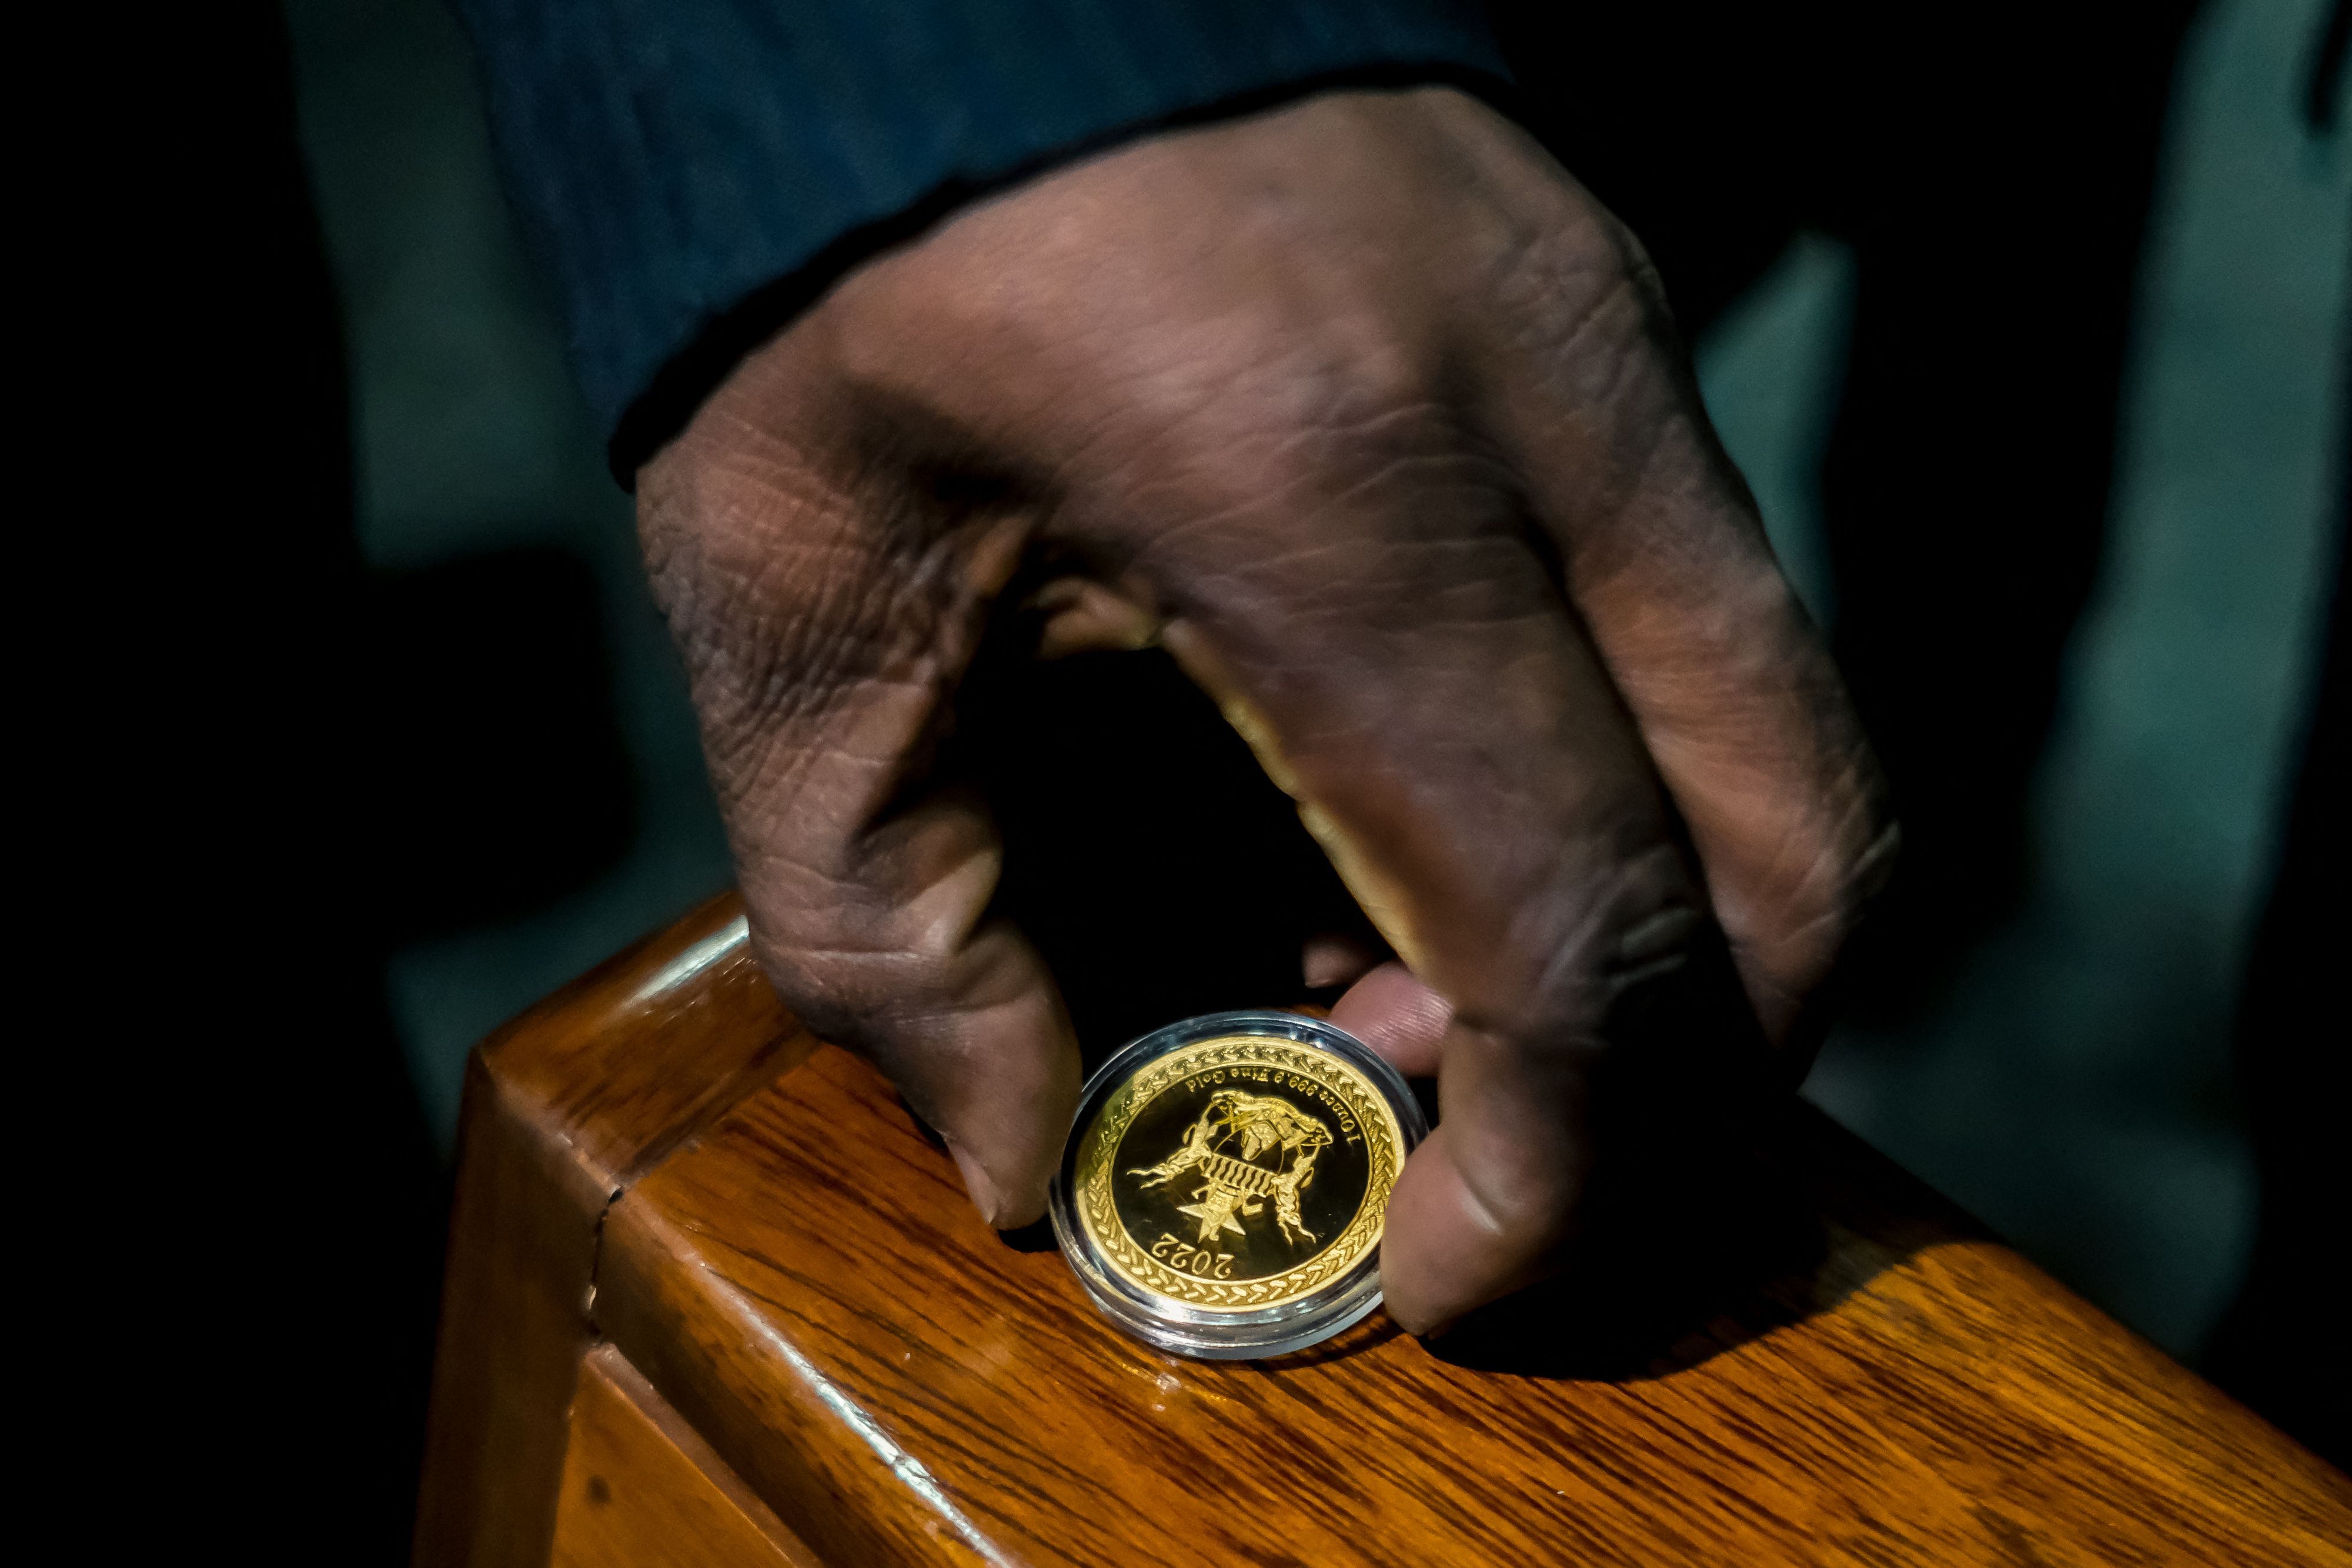 The measure adds to others announced this year to stabilize the currency and curb inflation such as lifting the key interest rate to 200% from 80%&nbsp;in June, reintroducing the US dollar as legal currency,&nbsp;selling gold coins&nbsp;and potentially setting up a&nbsp;currency board.